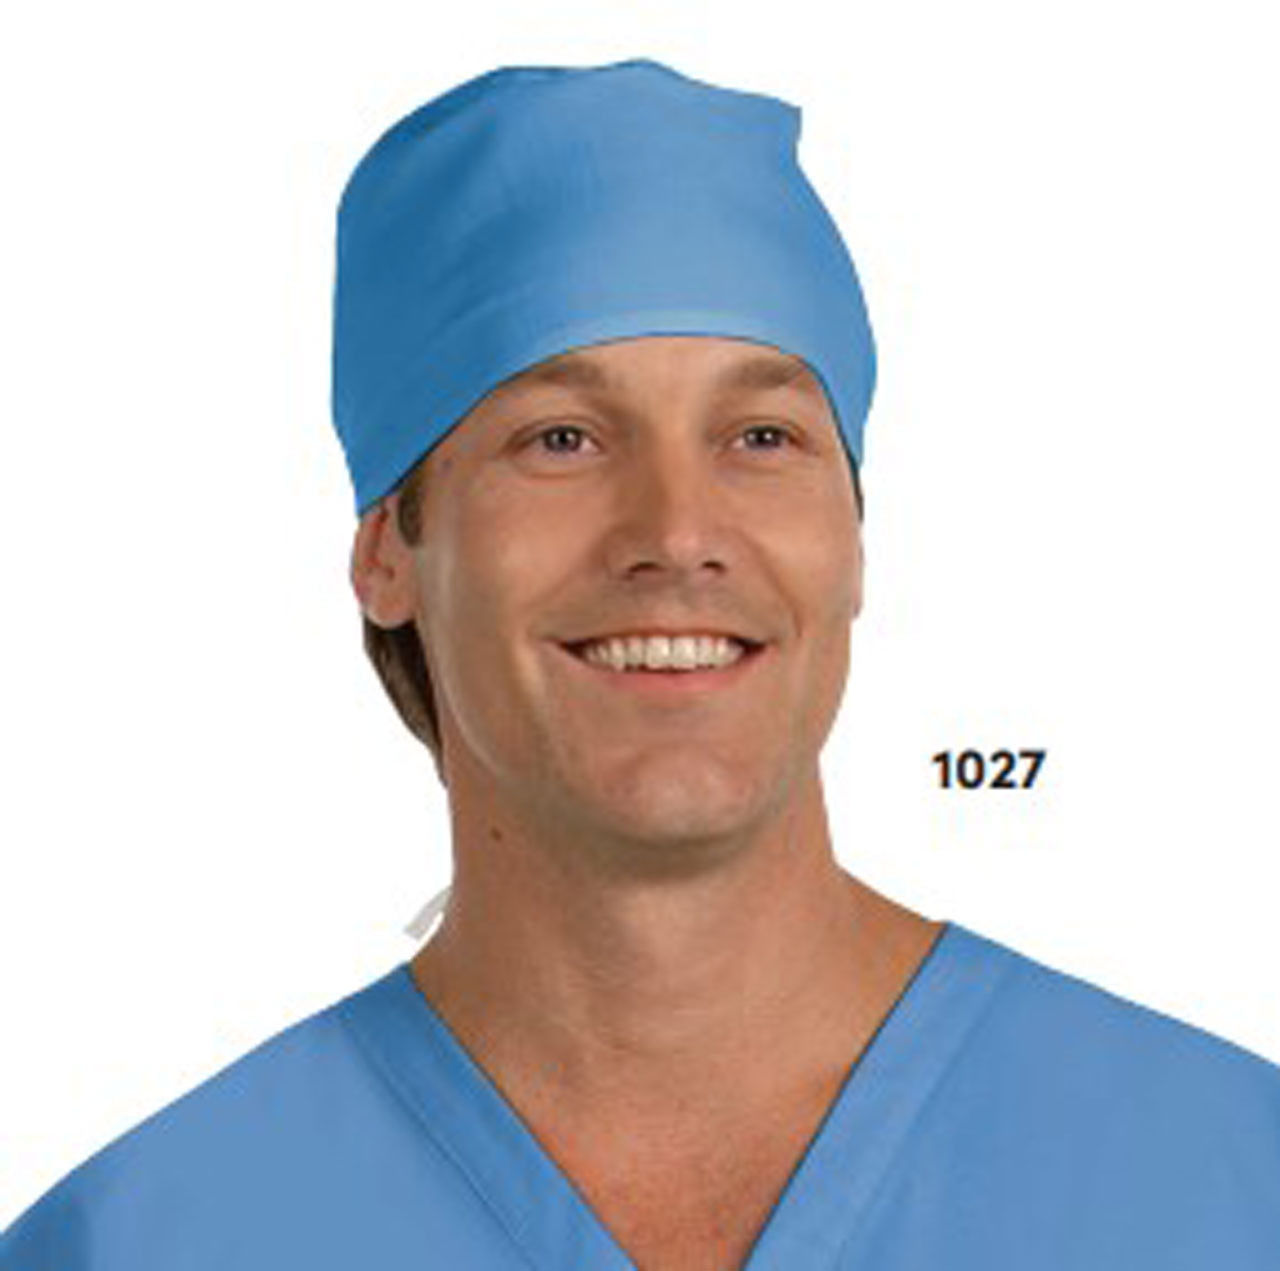 What's the material of these bulk scrub caps I'm planning to purchase?